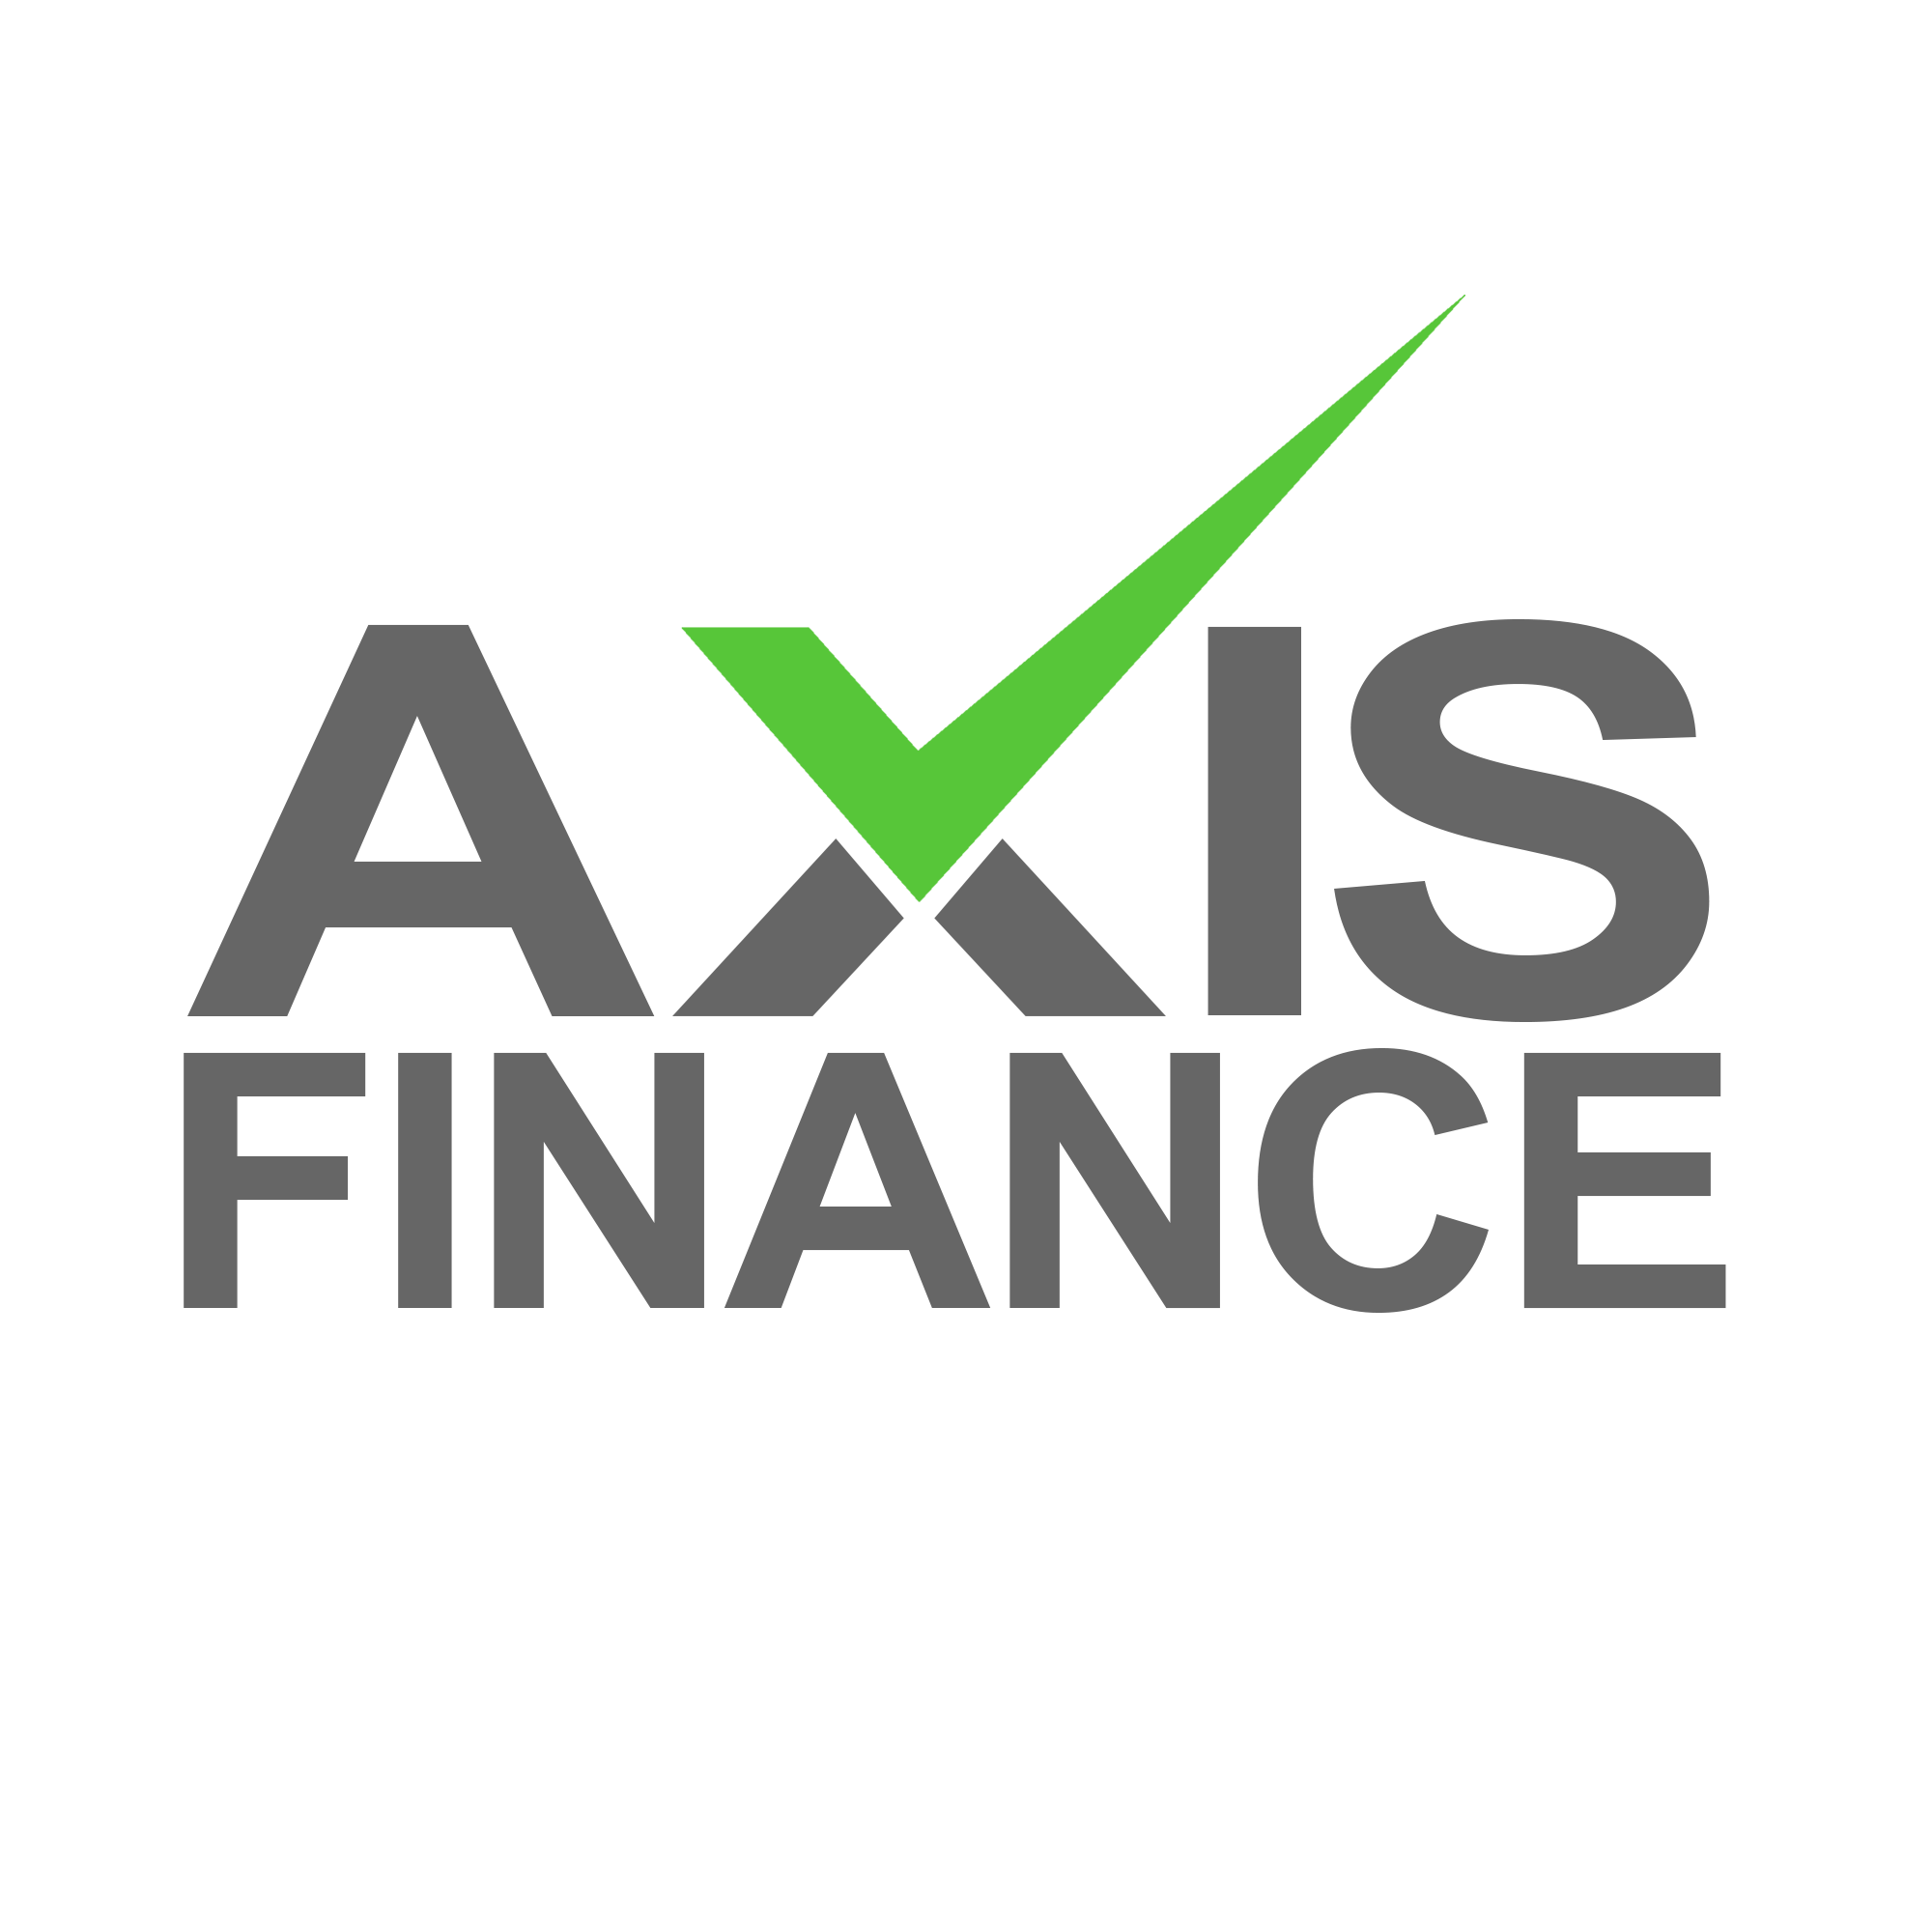 Axis Finance Limited